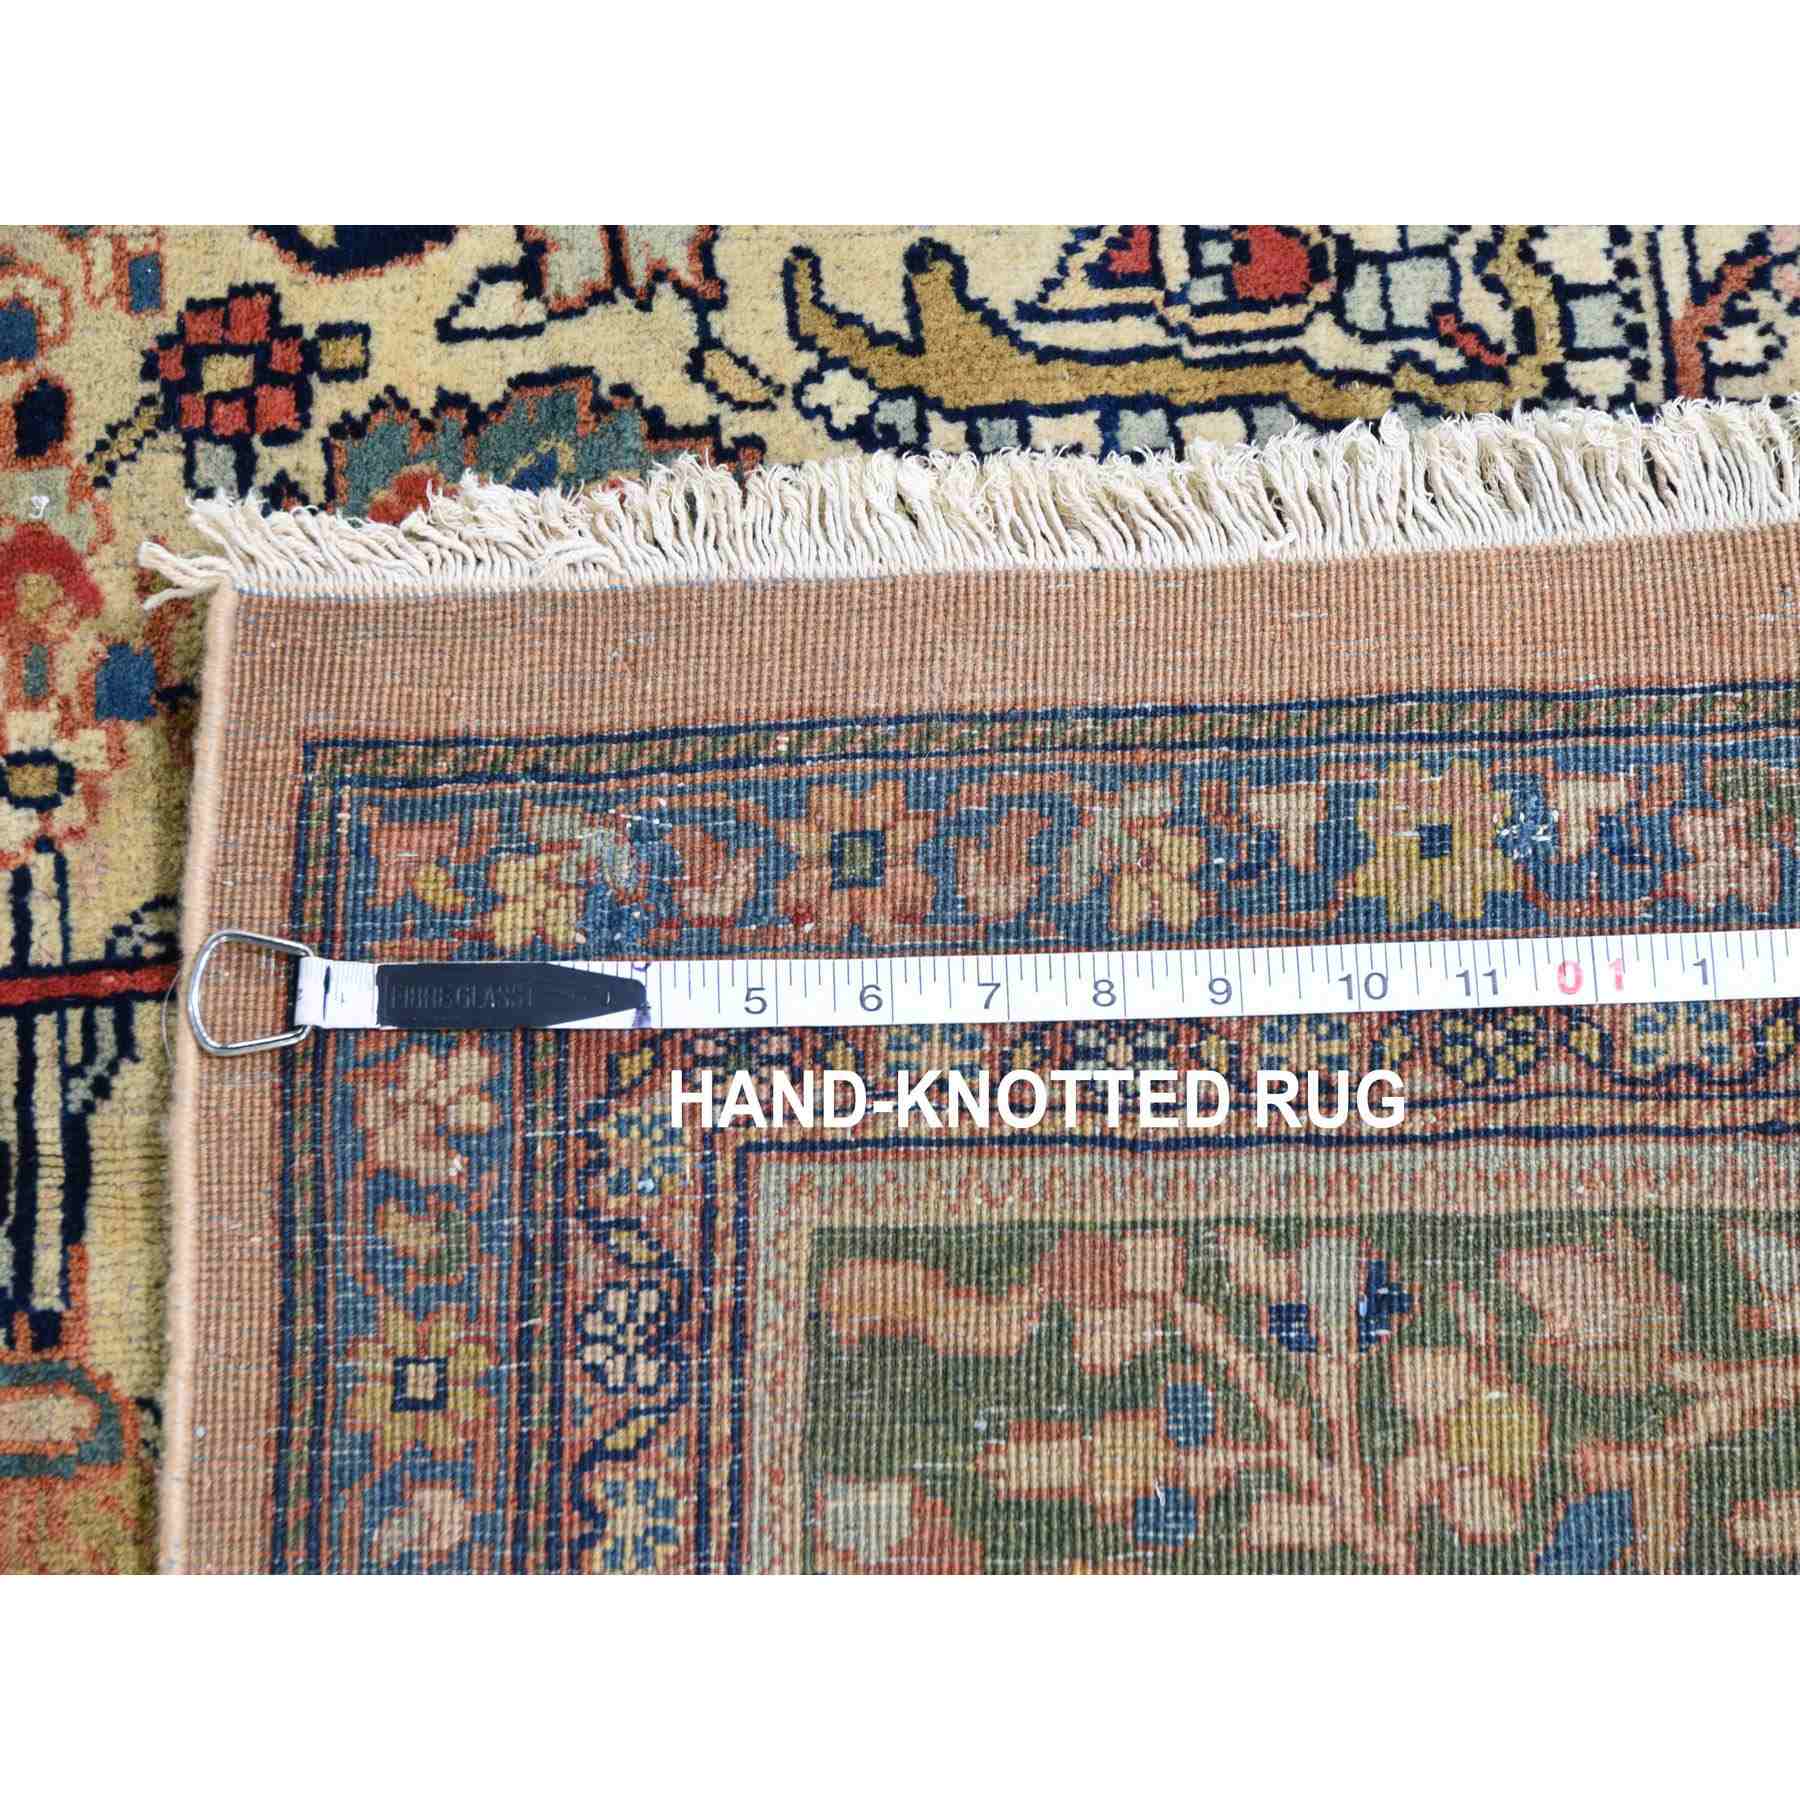 Antique-Hand-Knotted-Rug-243515